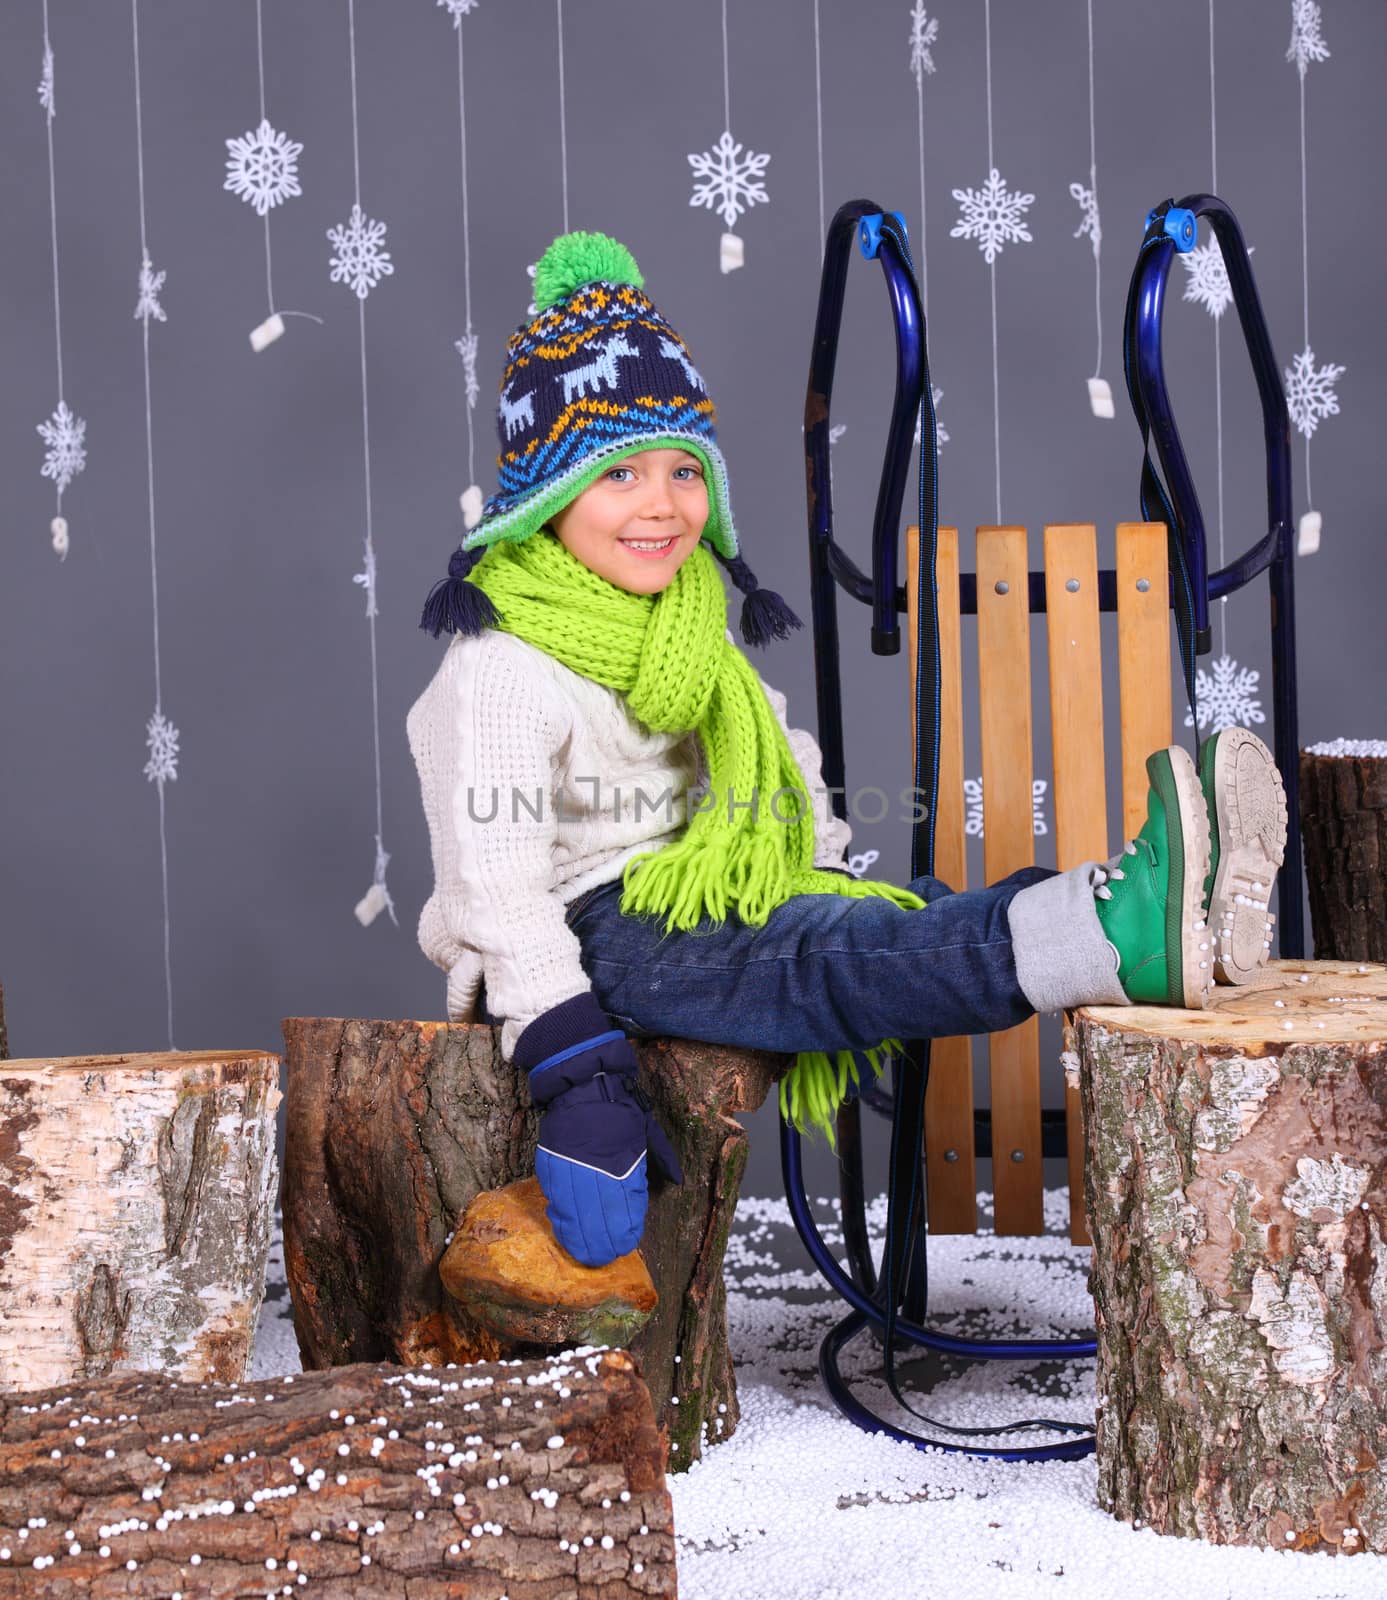 Winter Fashion. Portrait of adorable happy boy in winter hat, gloves and sweater in studio.